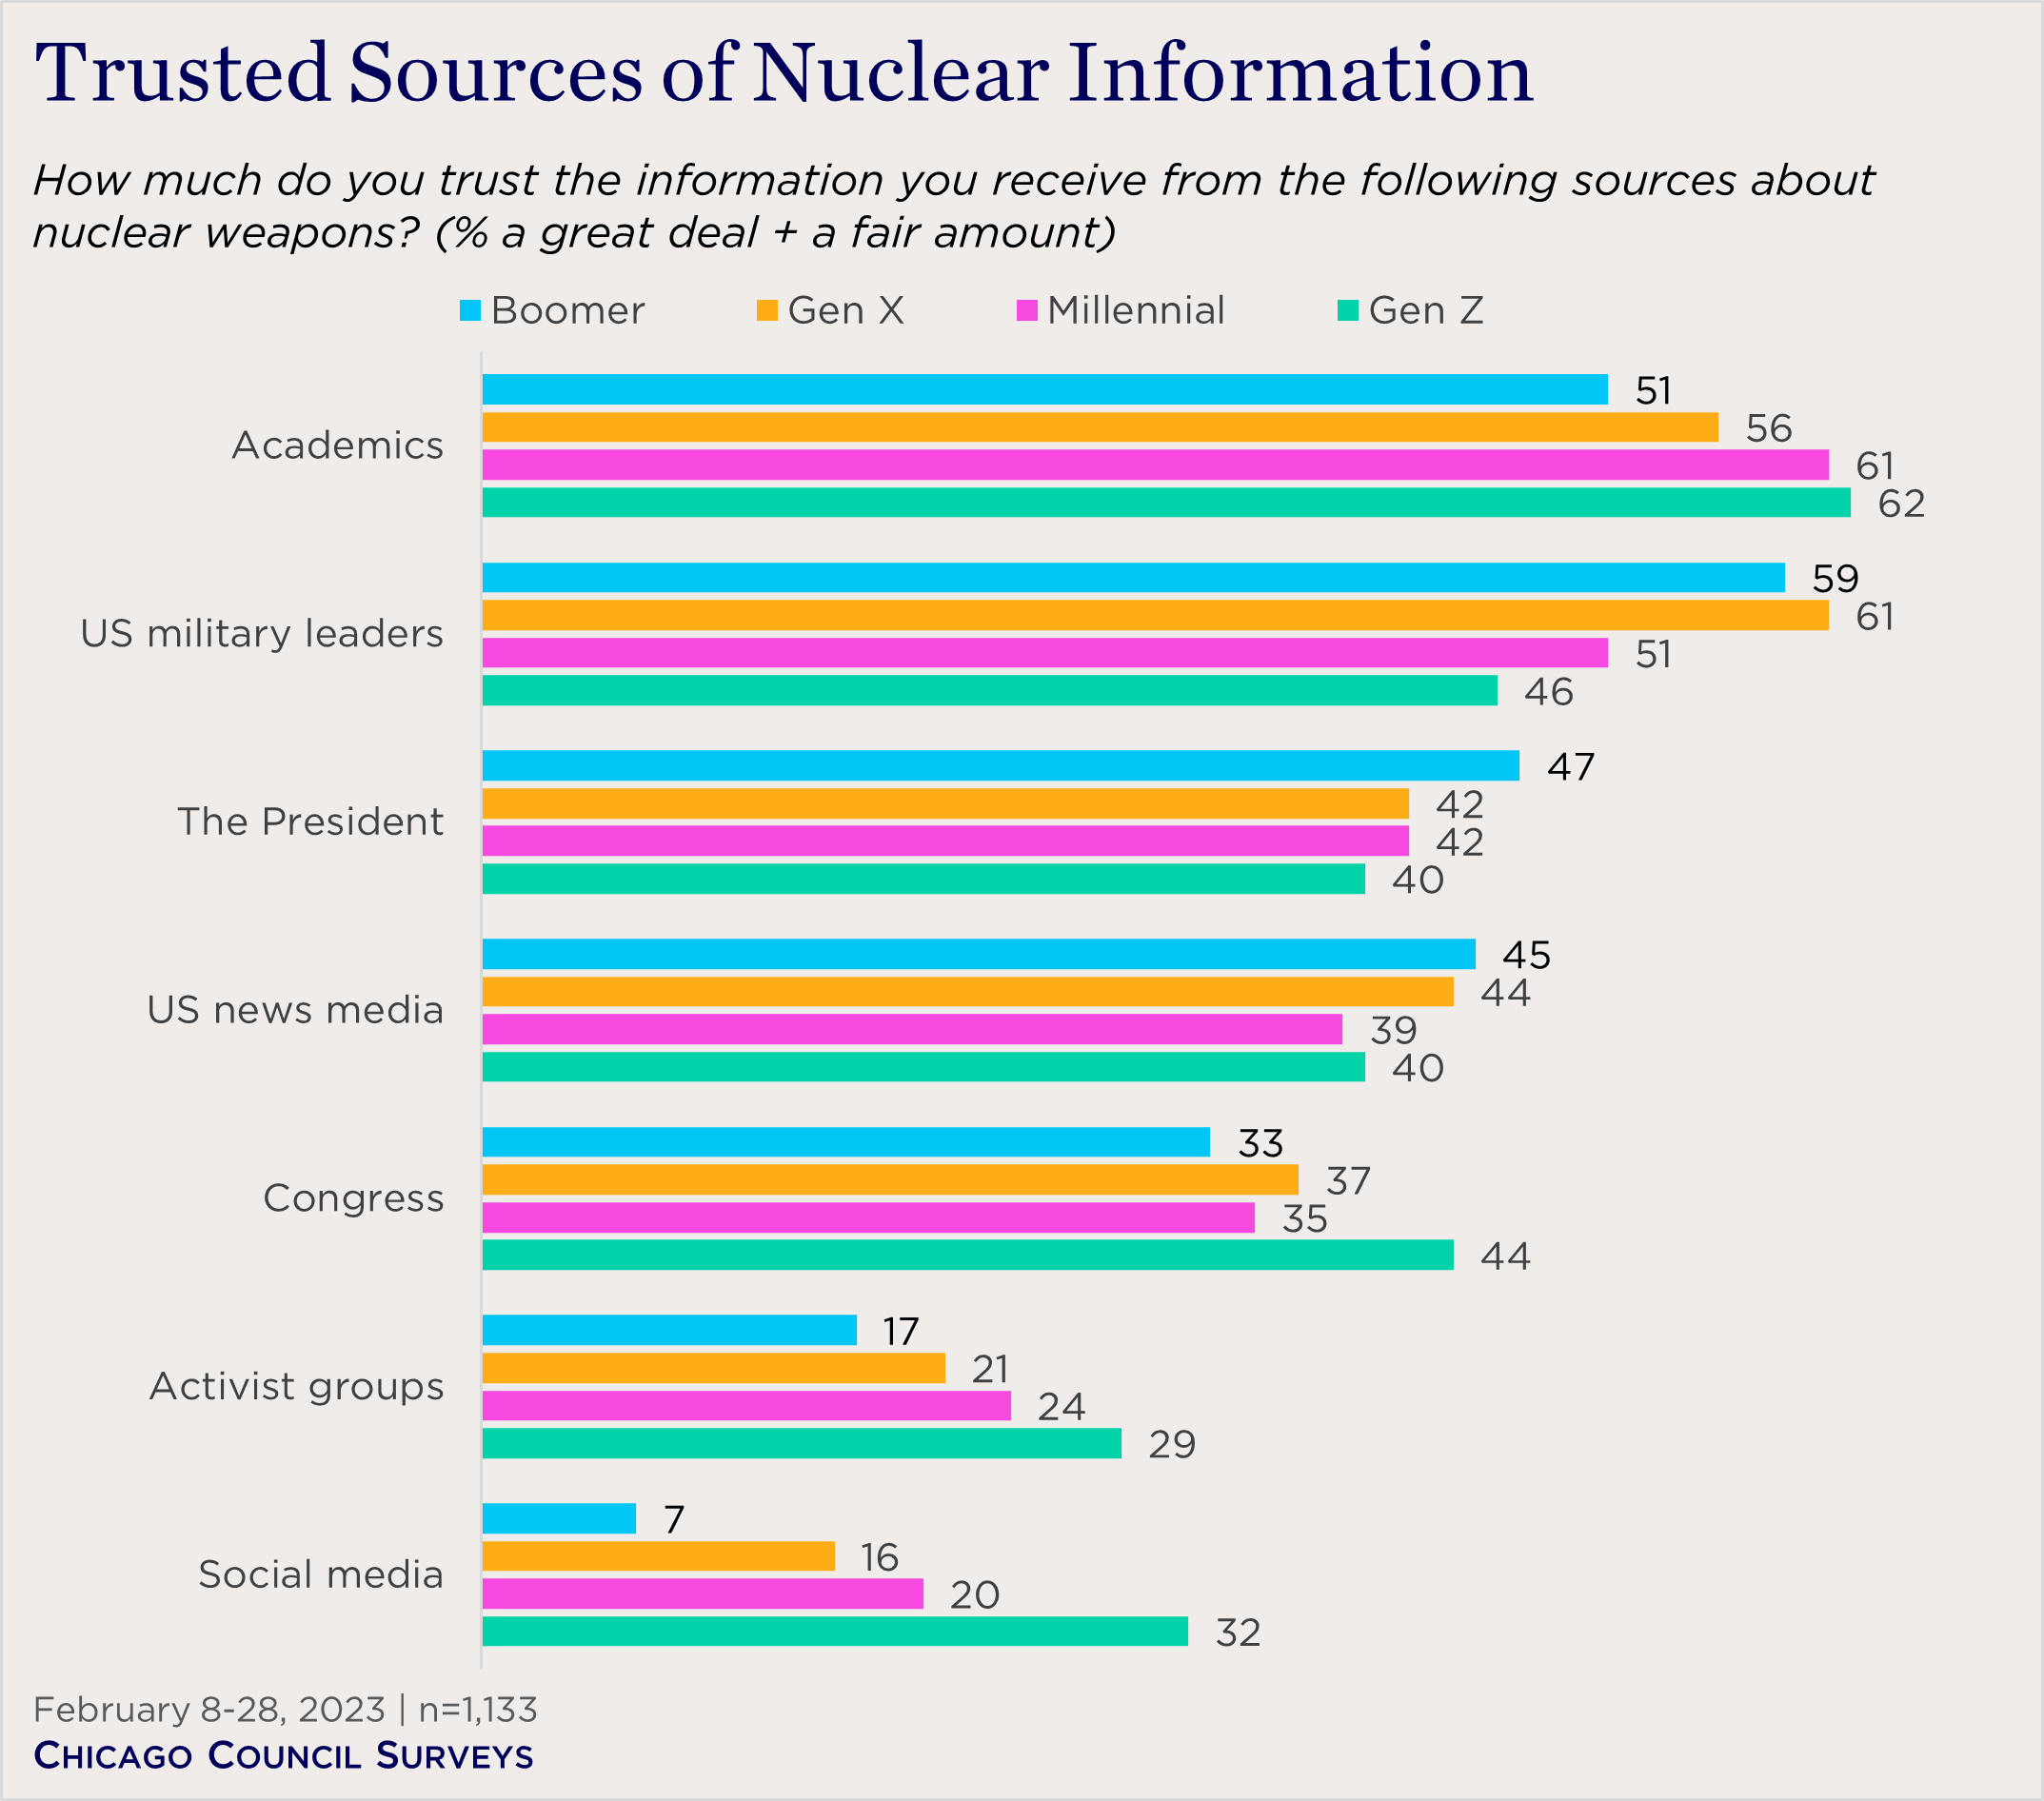 "bar chart showing trust in sources of nuclear information by generation"